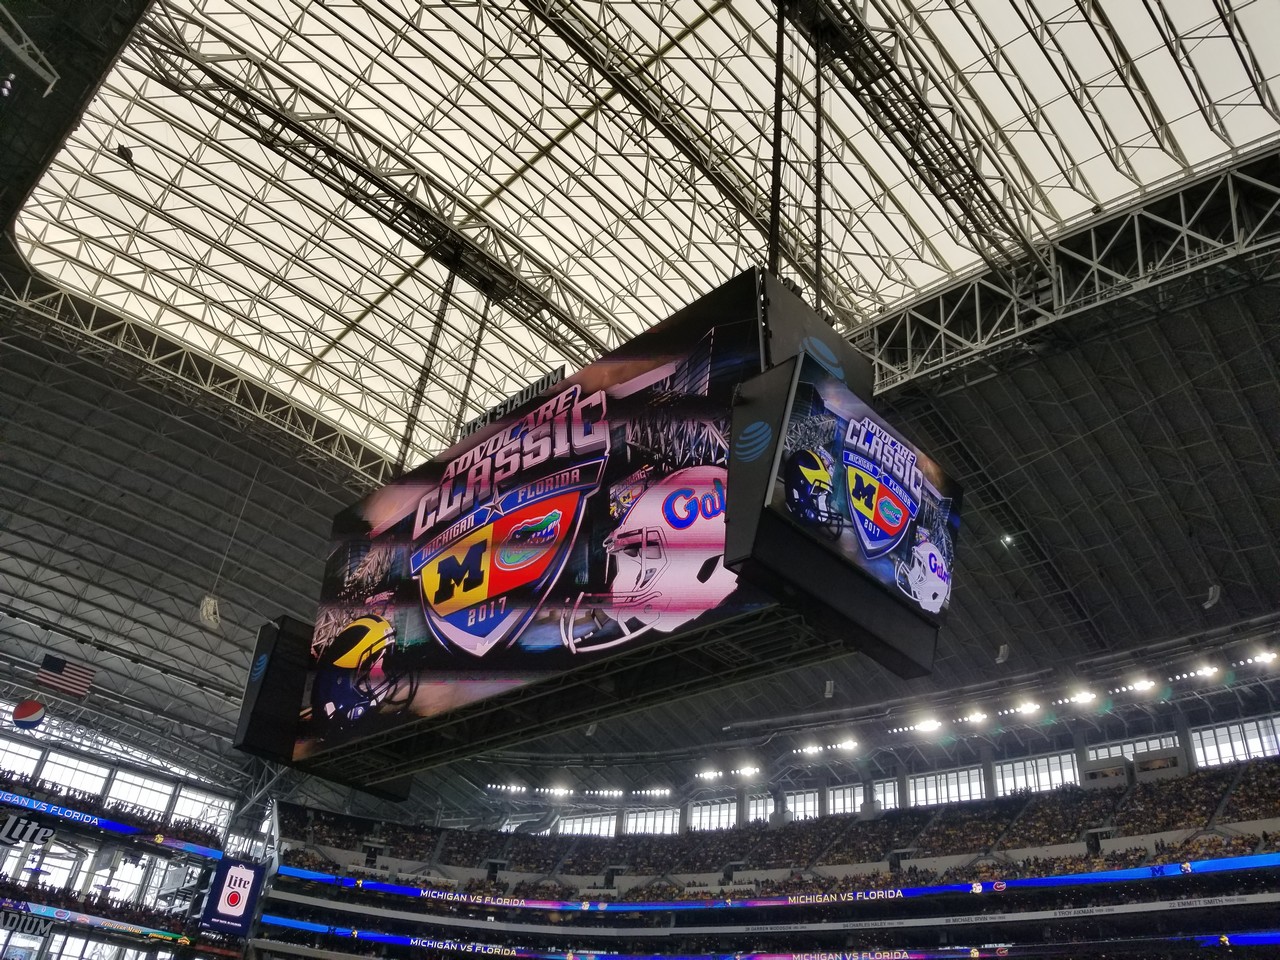 a large screen in a stadium